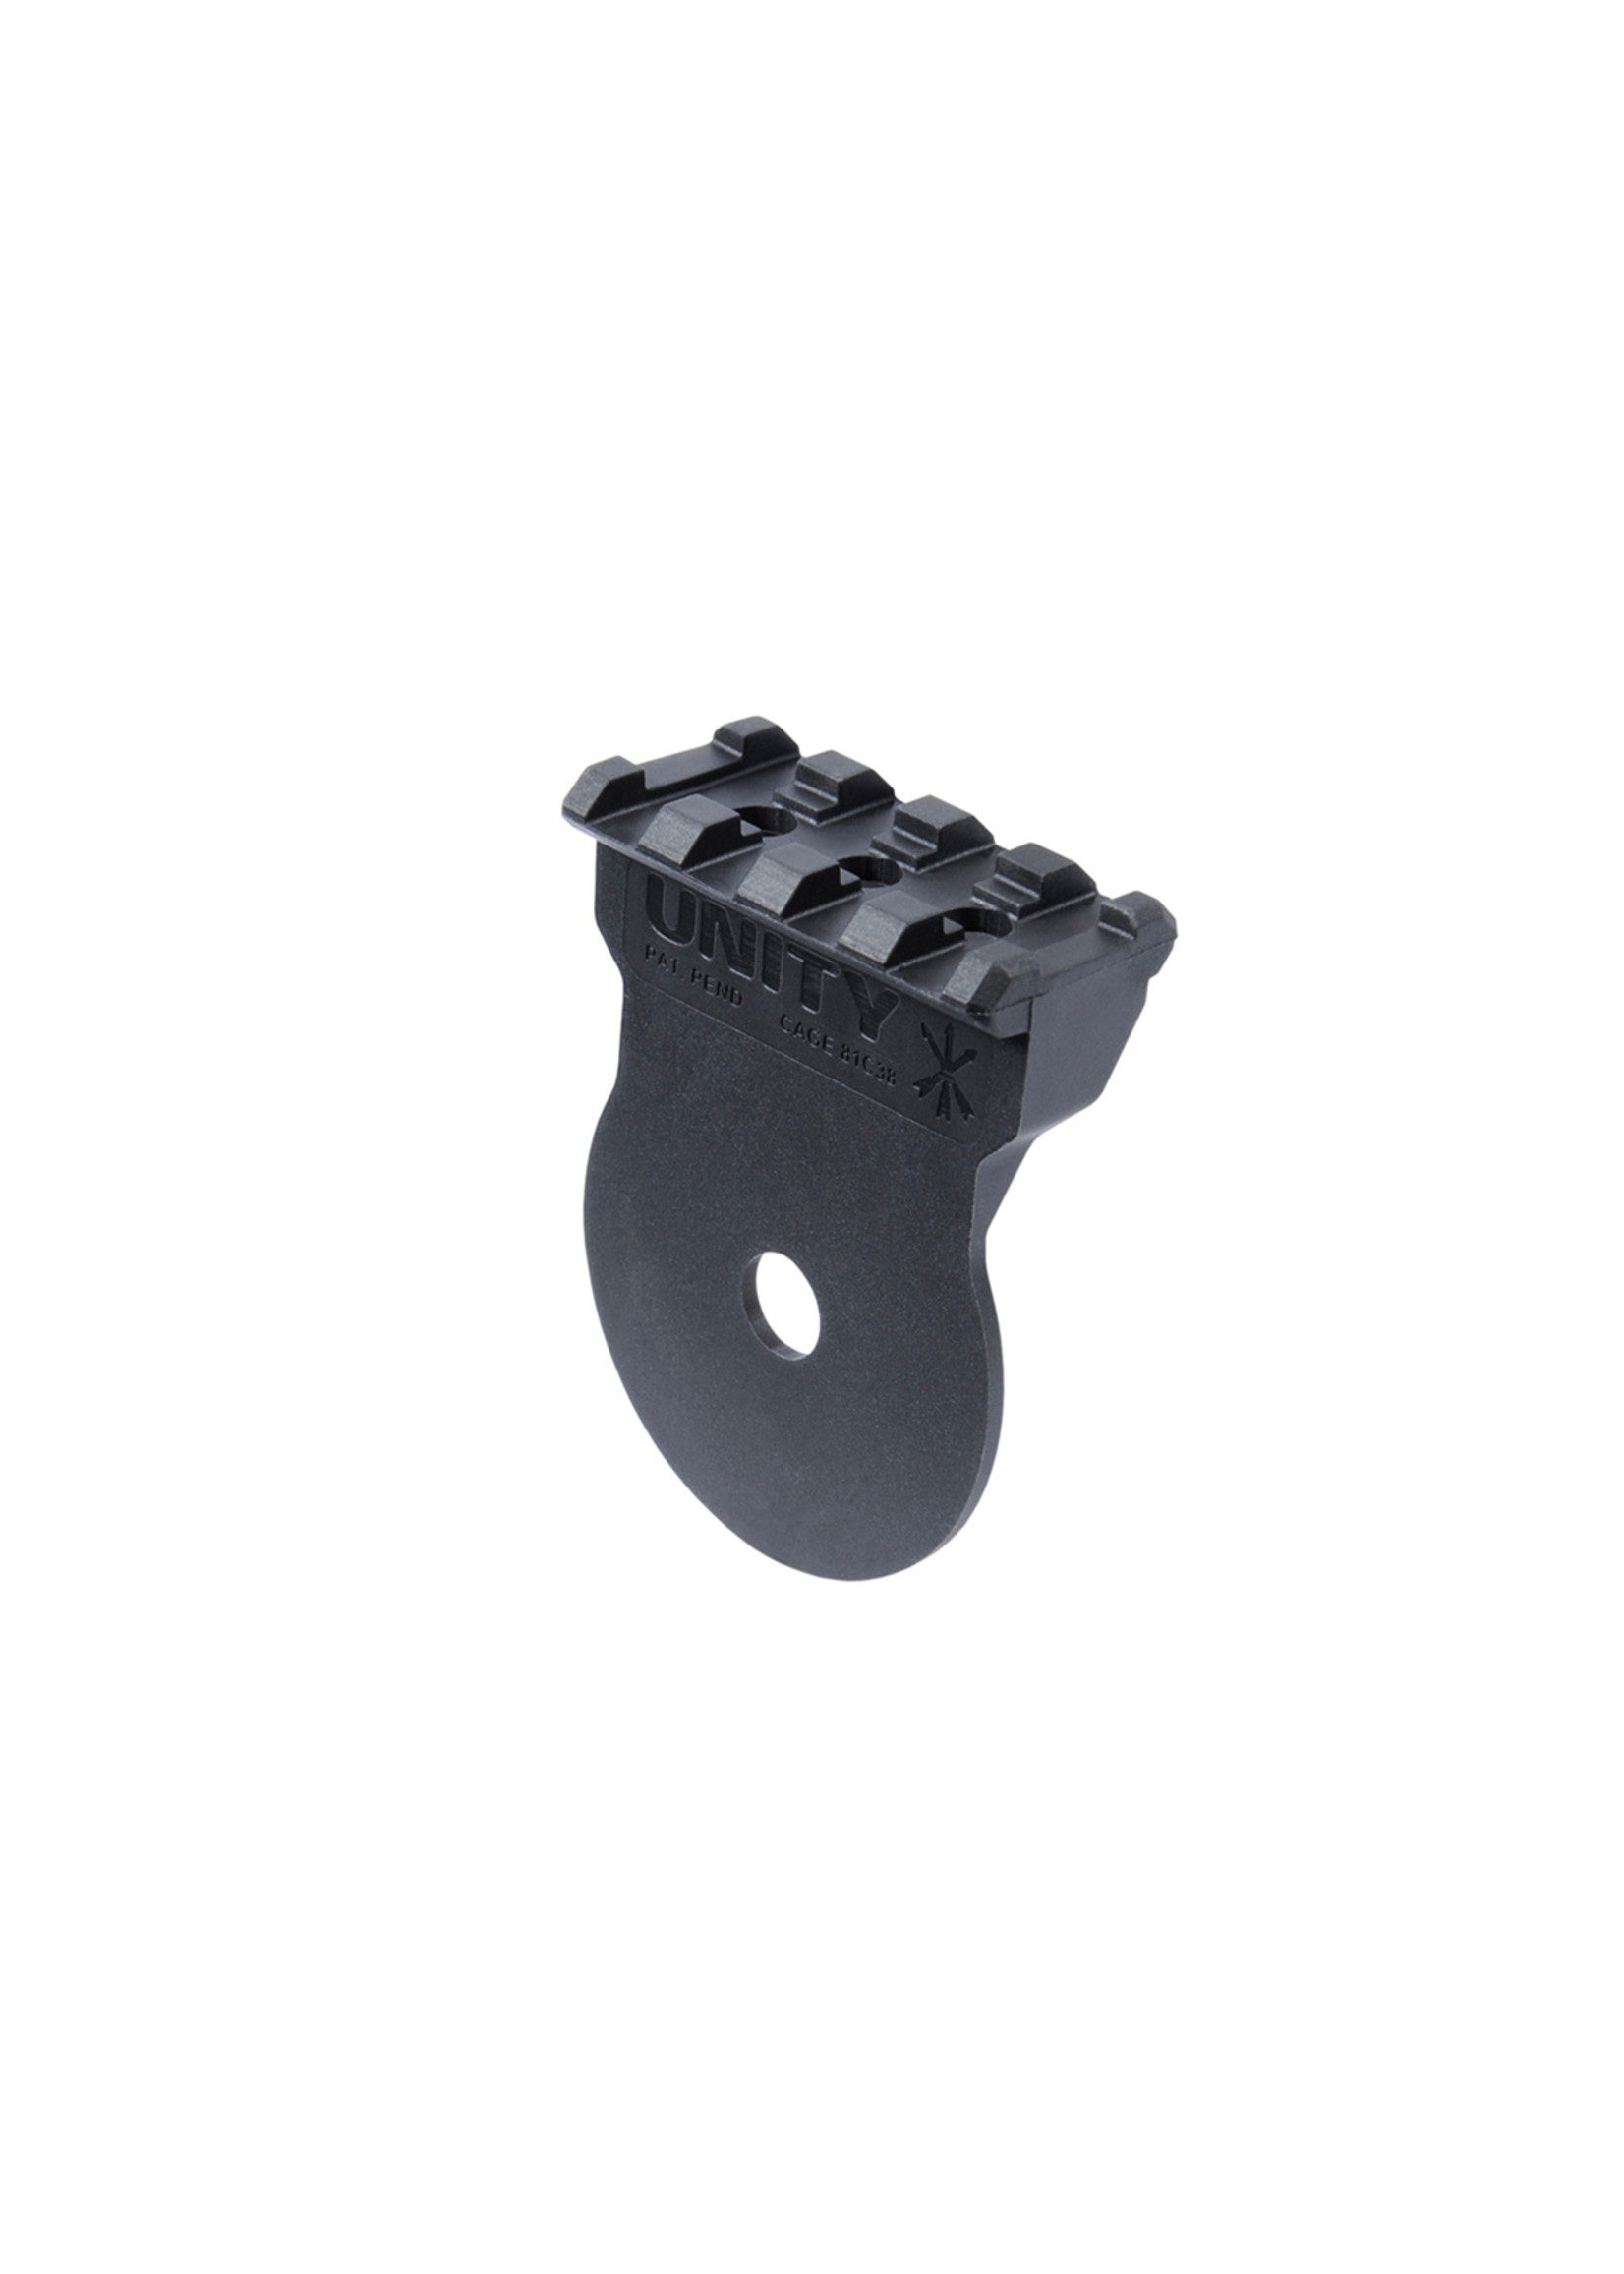 UNITY TACTICAL REMORA MOUNT FOR 3M PELTOR